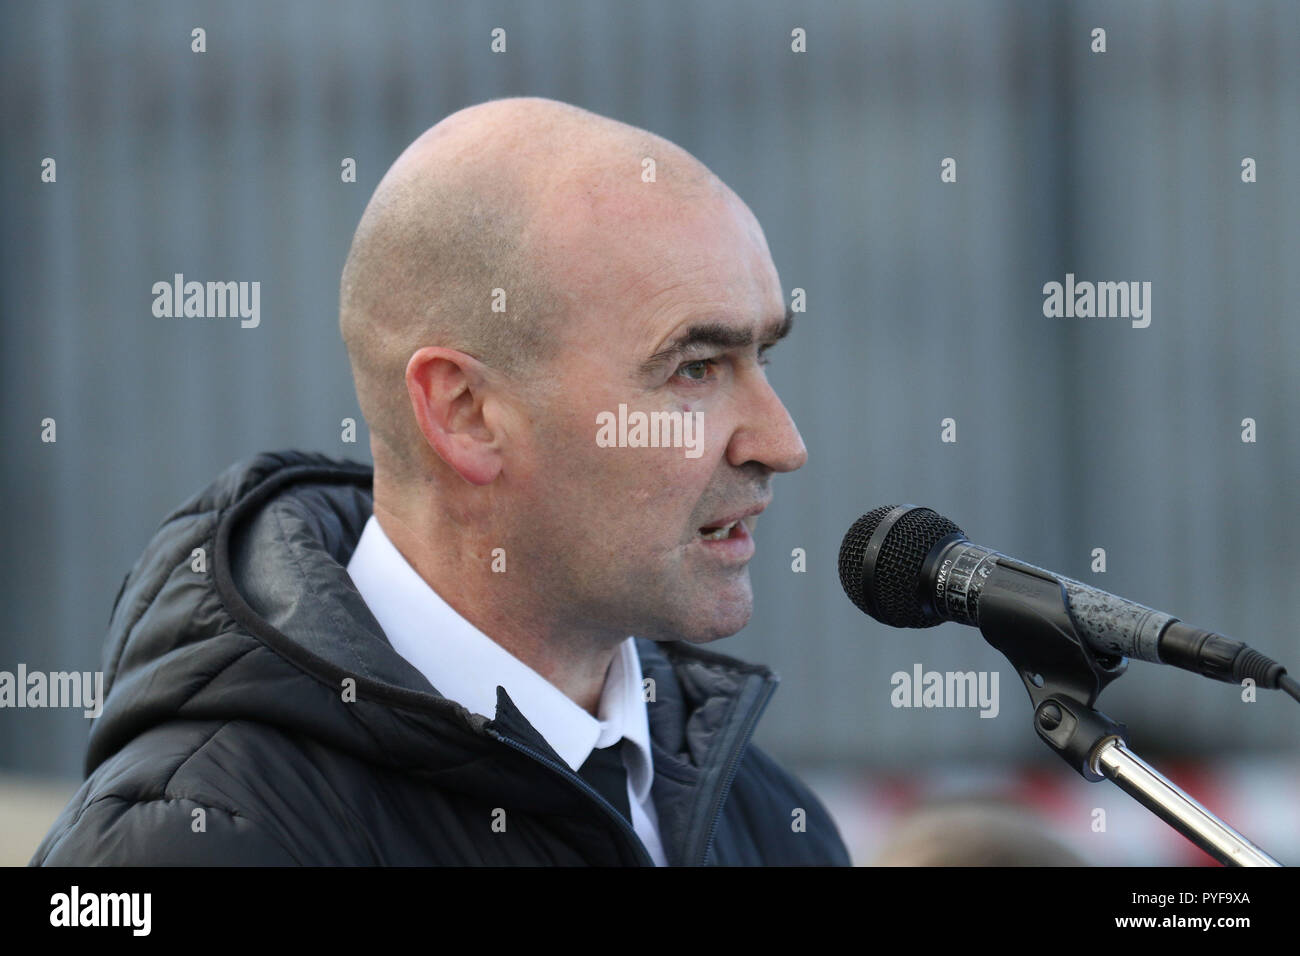 Former PIRA member Sean Kelly and Shankill bomber speaks at Milltown Cemetery in West Belfast, as Hundreds of people from across the communities of Northern Ireland have come together for a church service to mark the 25th anniversary of the Shankill bomb. Stock Photo